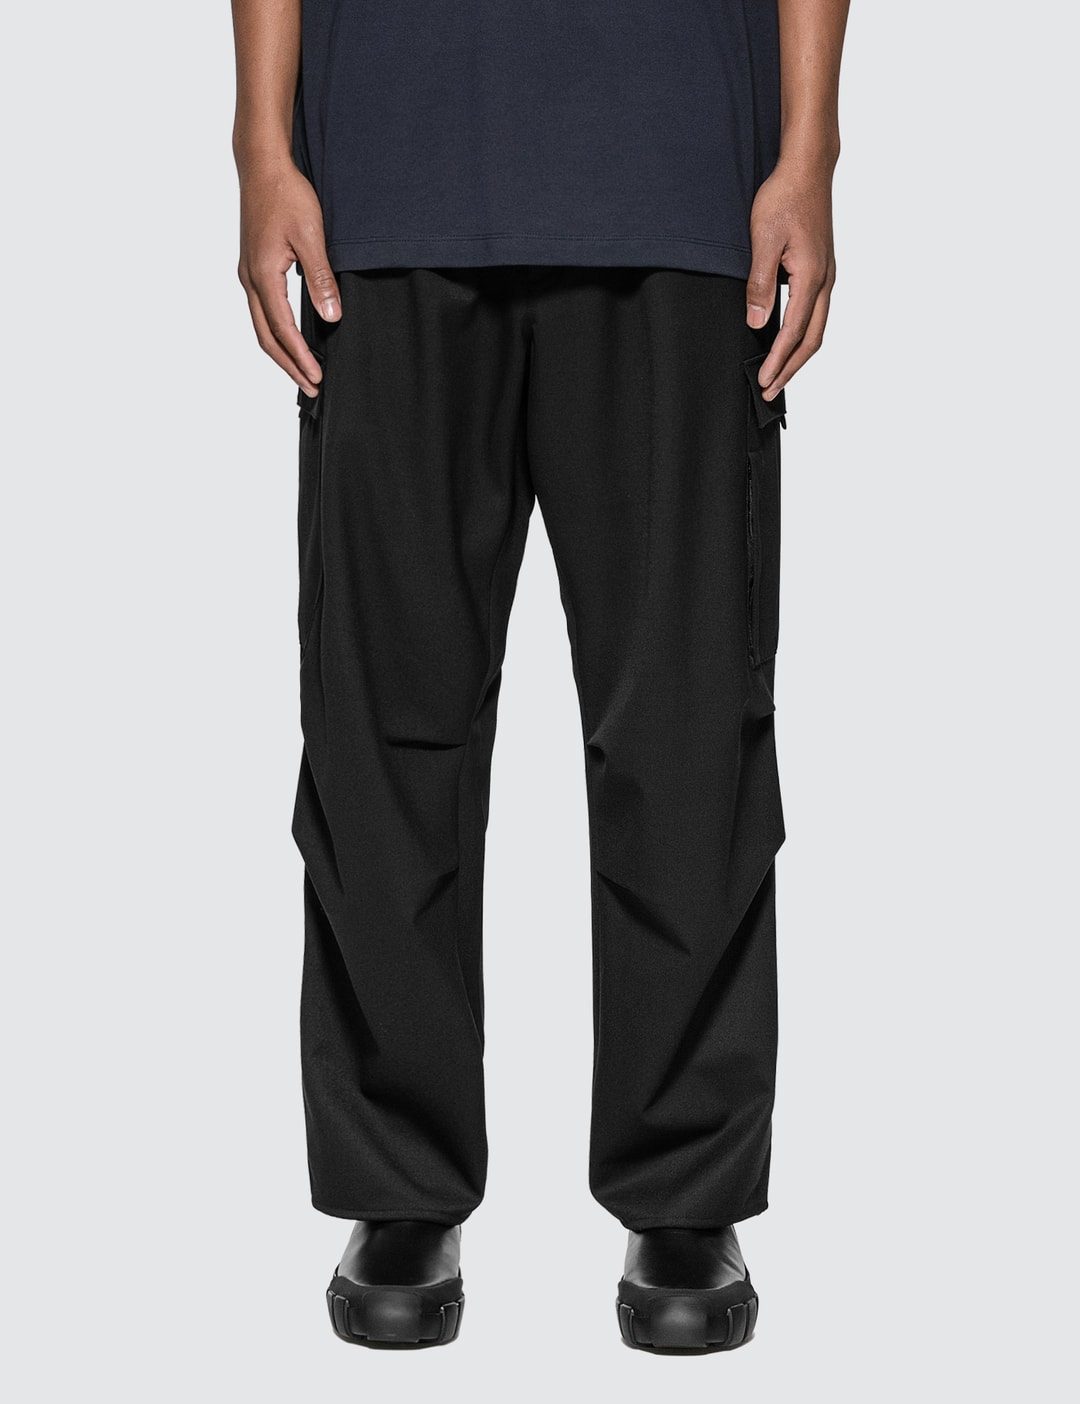 Y-3 - Y-3 CL Cargo Pants | HBX - Globally Curated Fashion and Lifestyle ...